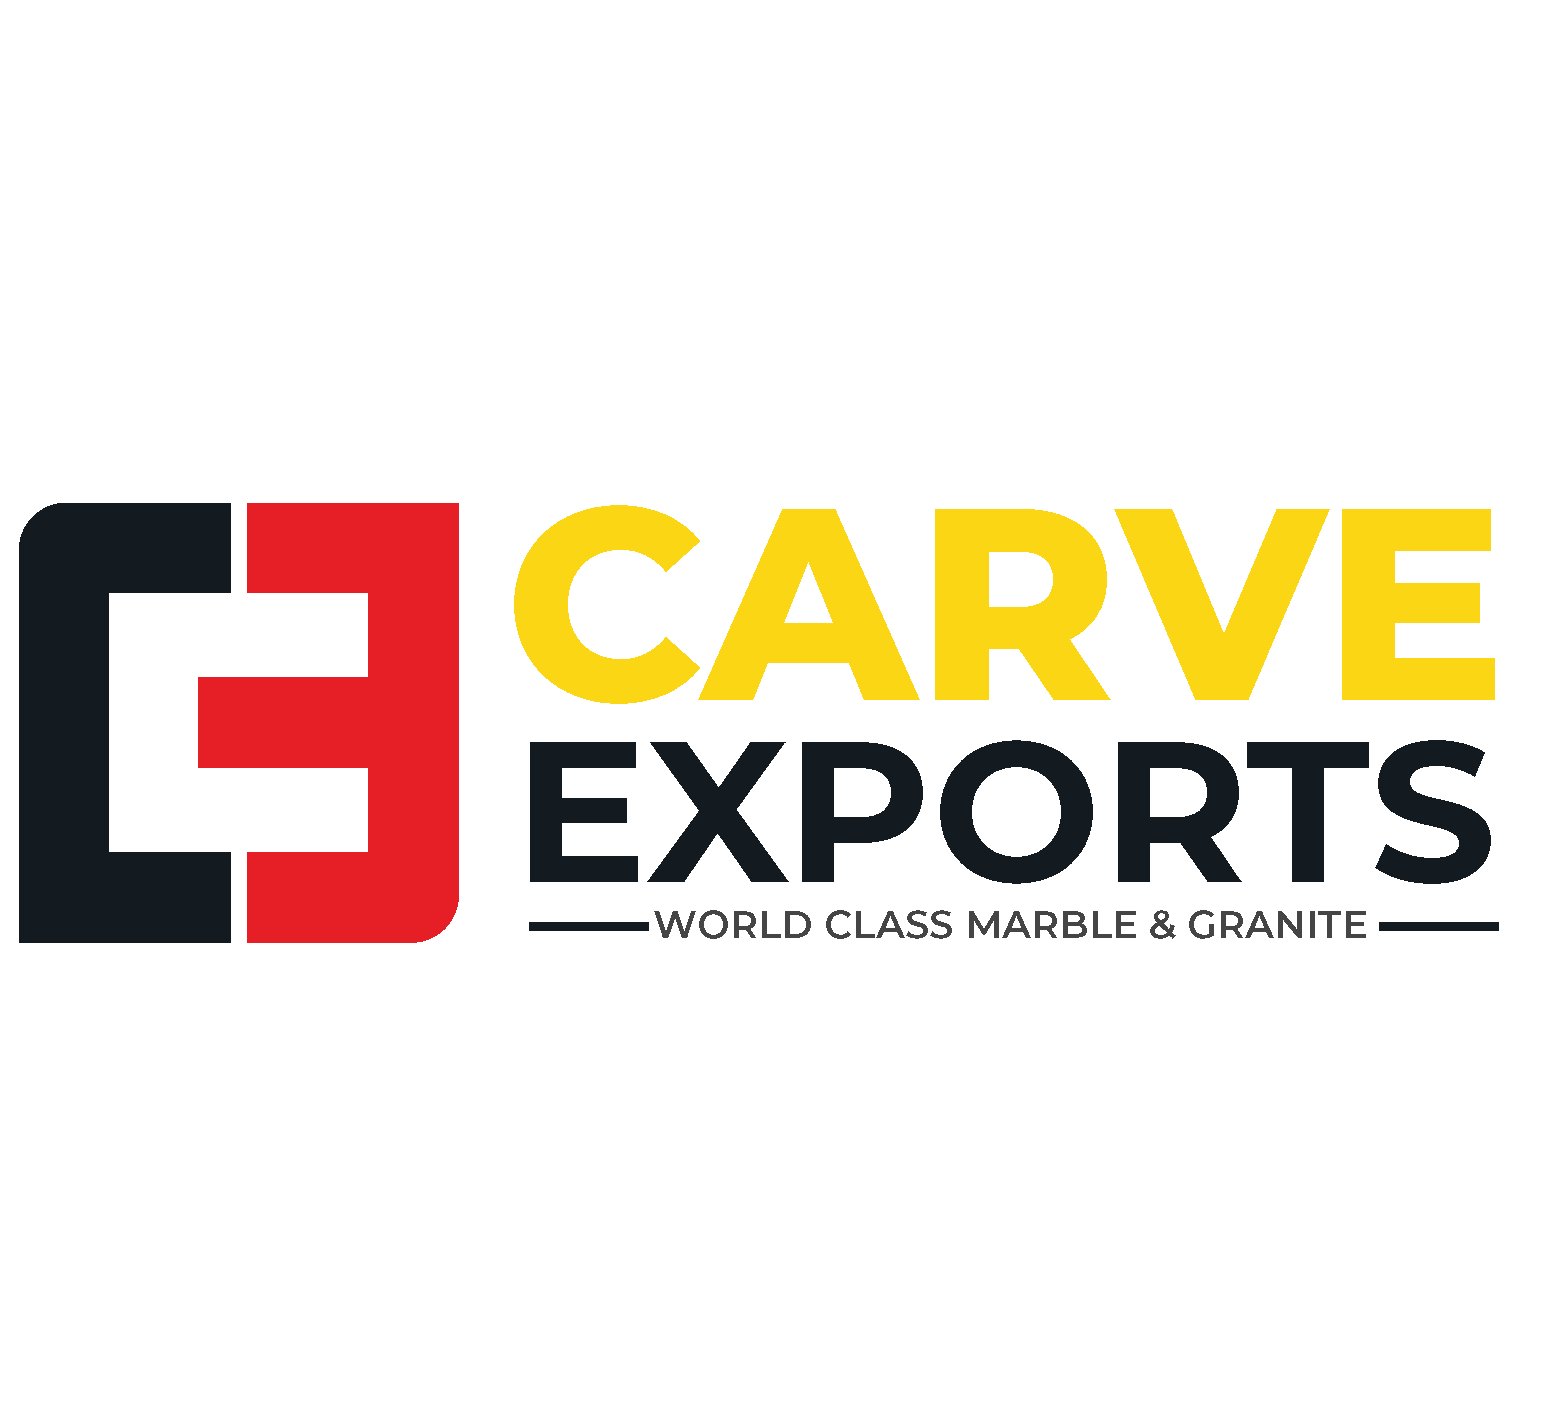 Carve Exports